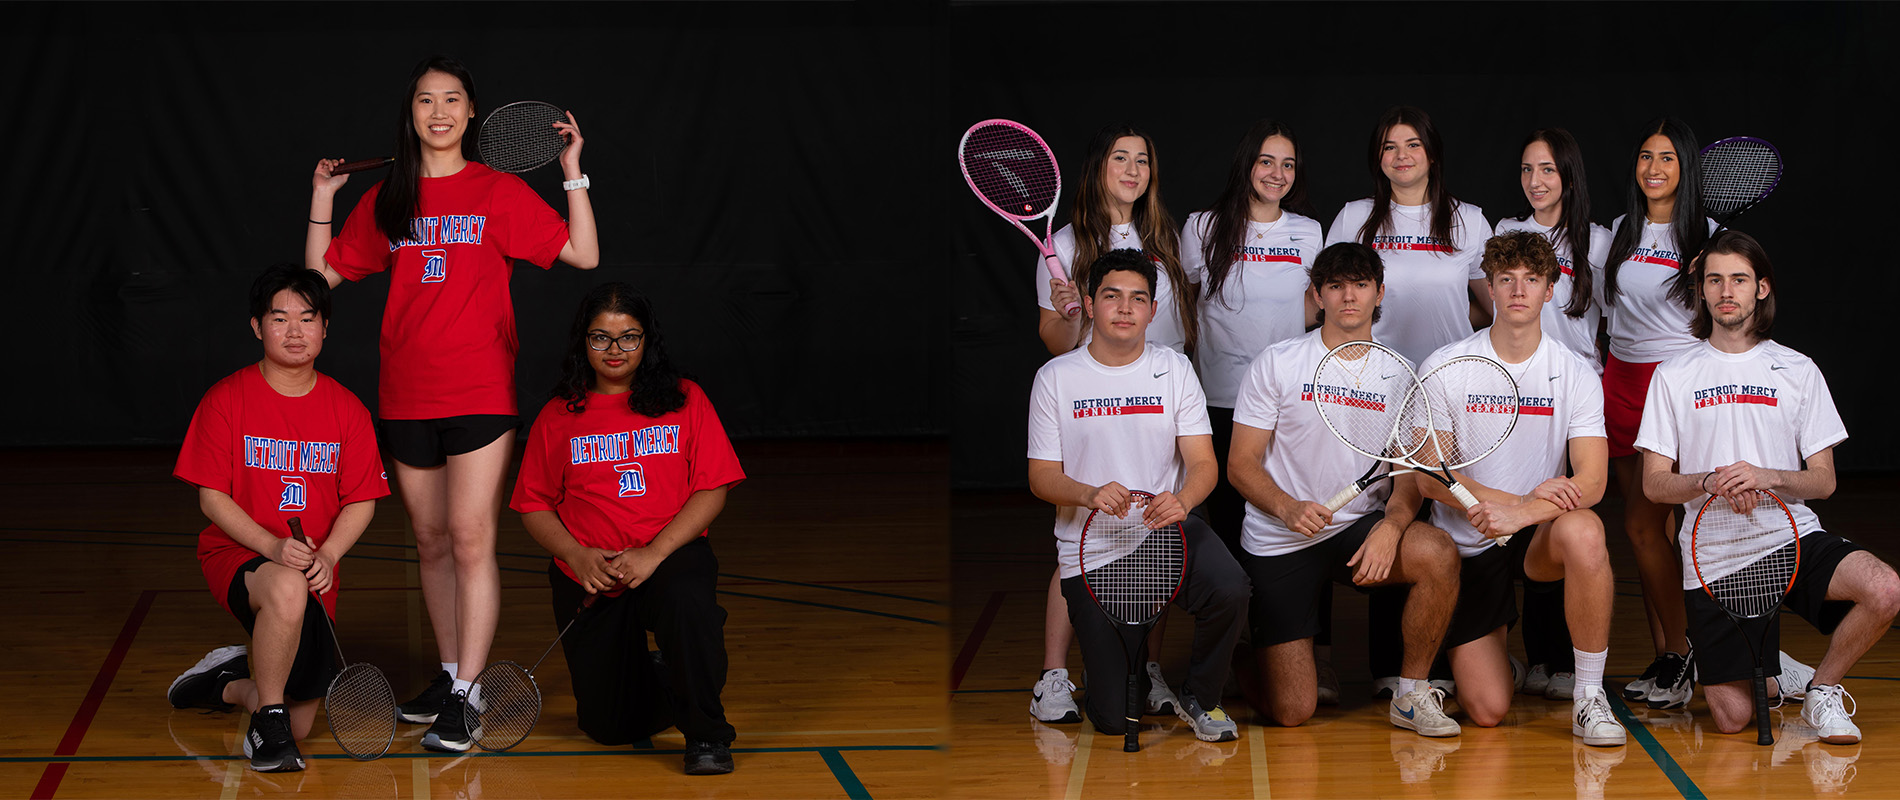 Members of the badminton and tennis club teams at University of ɫۺϾþ Mercy hold their rackets as they pose for team photos inside a darkened Student Fitness Center.